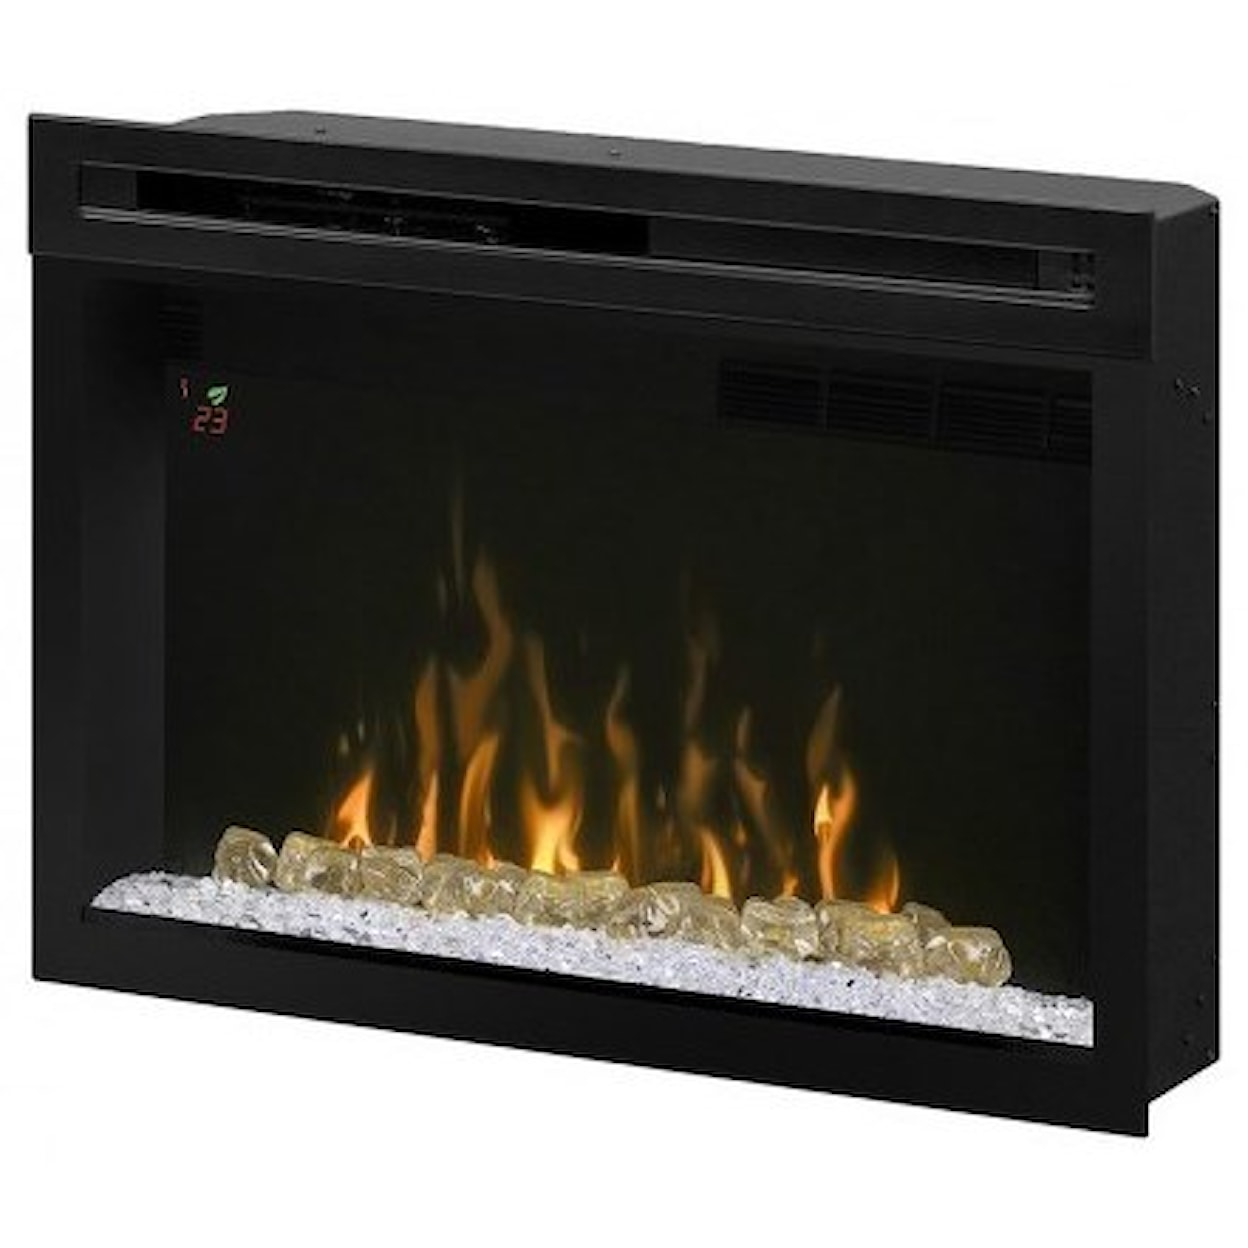 Dimplex Electric Fireboxes 33" Electric Fireplace Insert Glass Bed